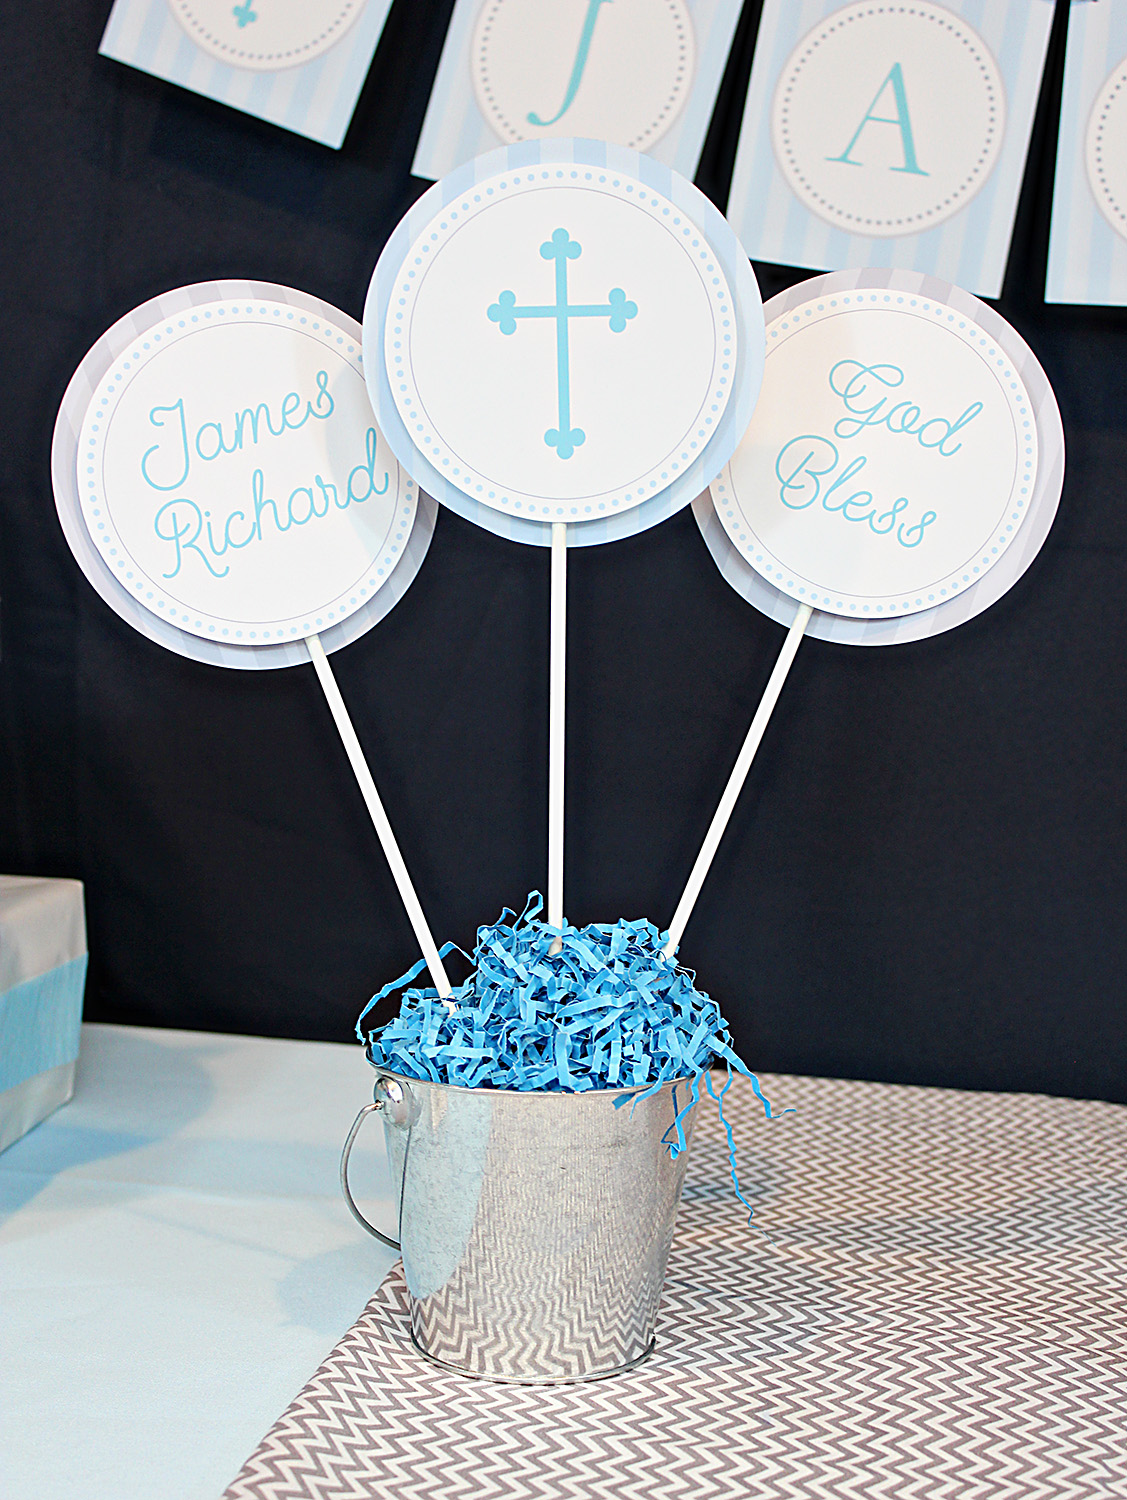 First Communion Party Decorations in Blue – 505 Design, Inc